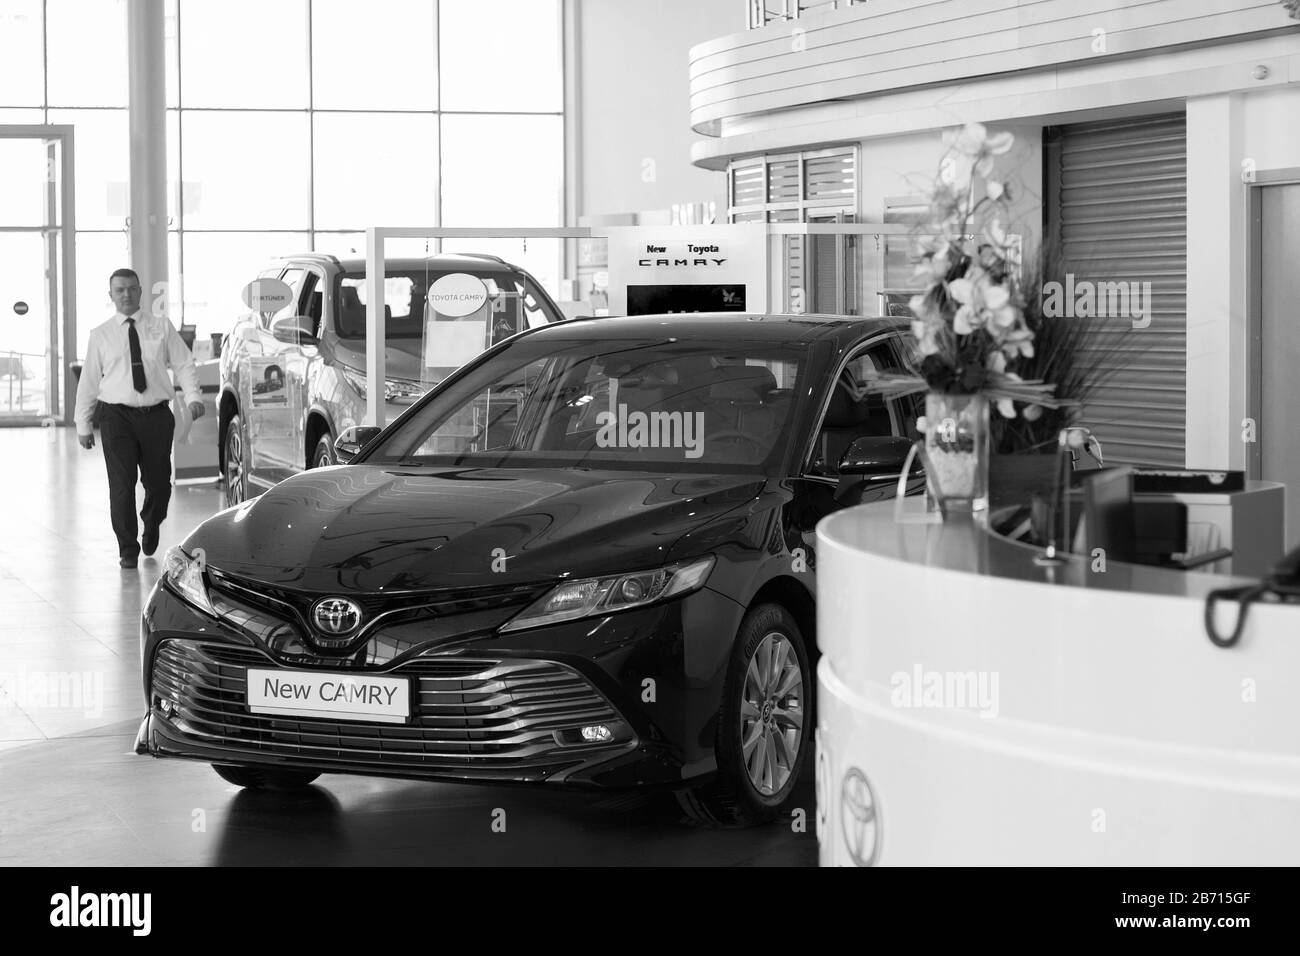 Russia, Izhevsk - April 21, 2018:Showroom Toyota. New vehicle Toyota Camry. Black-and-white image. Front view. Stock Photo